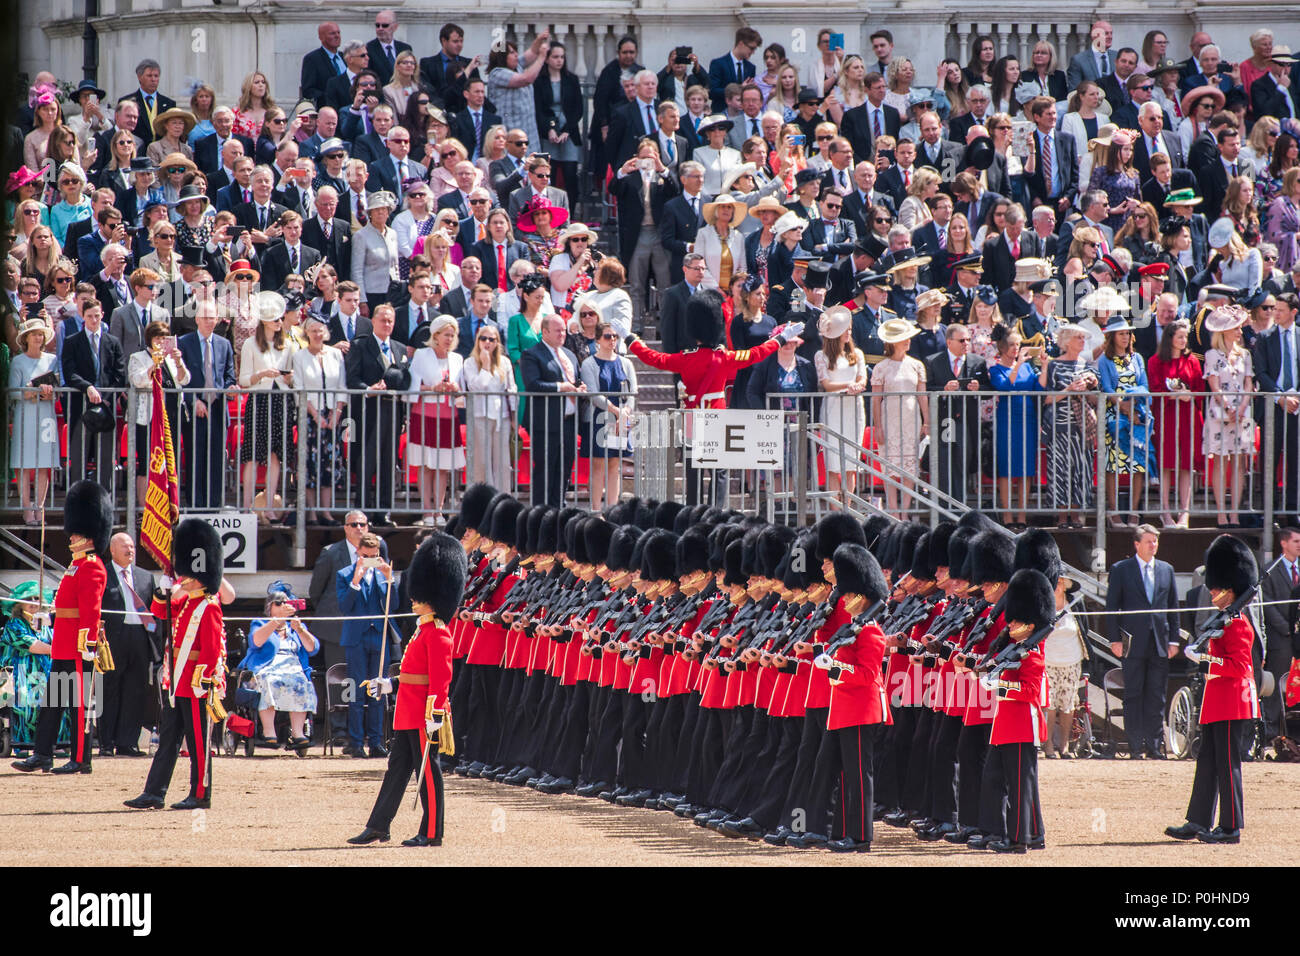 London, UK, 9 June 2018. The Queen’s Birthday Parade, more popularly known as Trooping the Colour. The Coldstream Guards Troop Their Colour., Credit: Guy Bell/Alamy Live News Stock Photo